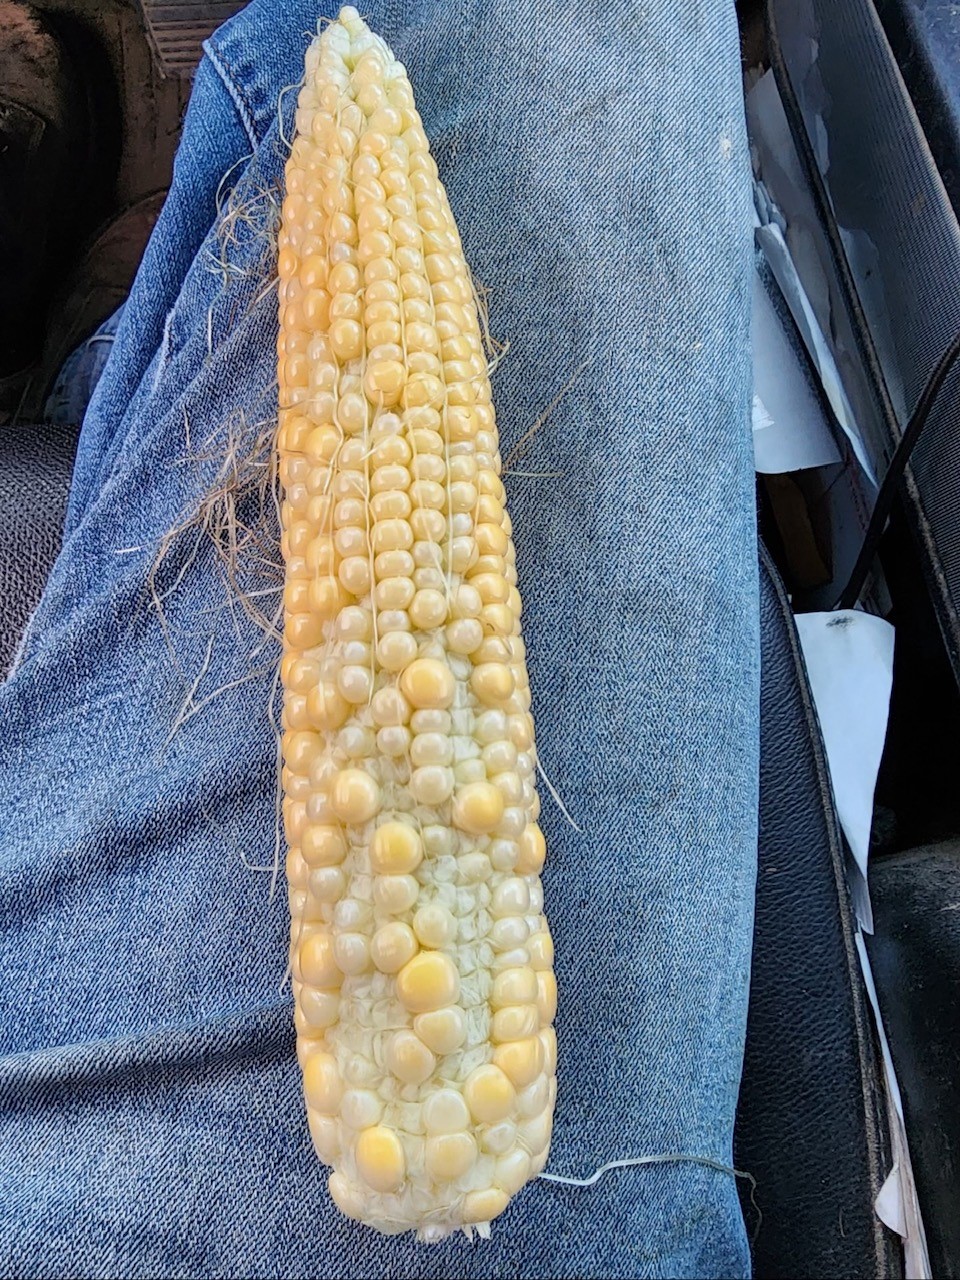 Figure 2. Poor pollination and missing kernels at the base of the ear caused by silks emerging too early prior to tassel presence and pollen shed. (Photo Credit: Brian Early, Indiana Pioneer Field Agronomist, 2023) 